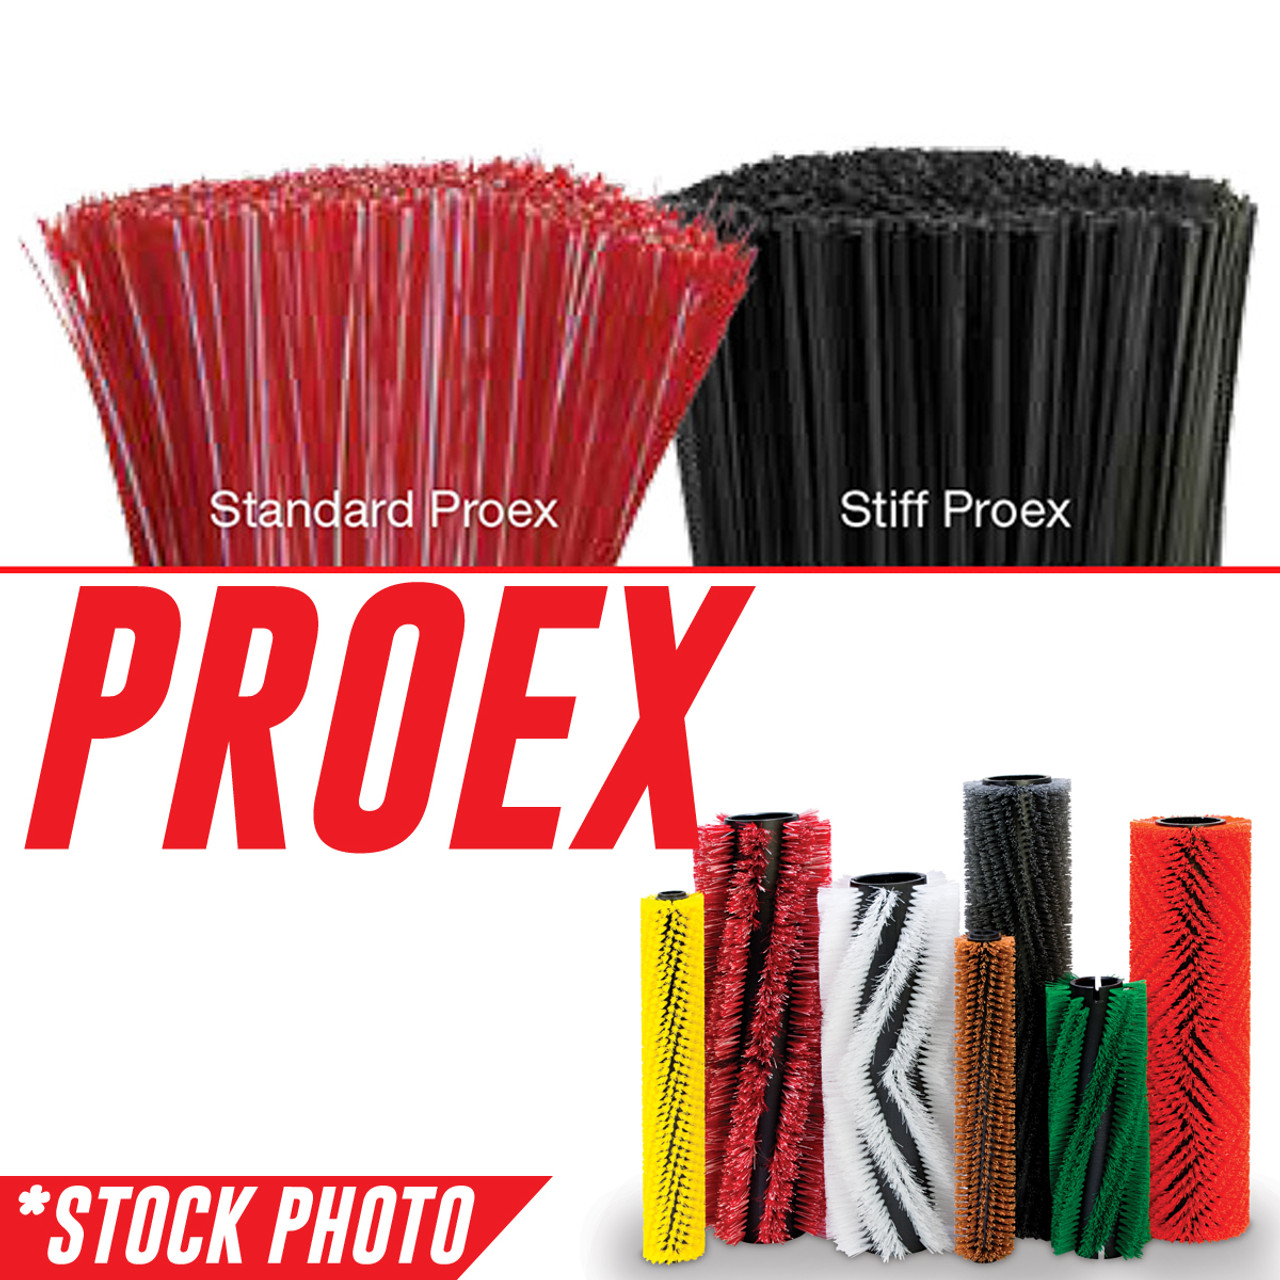 56493503: 36" Cylindrical Brush 12 Double Row Stiff Proex/Wire fits Advance-Nilfisk Models 5200